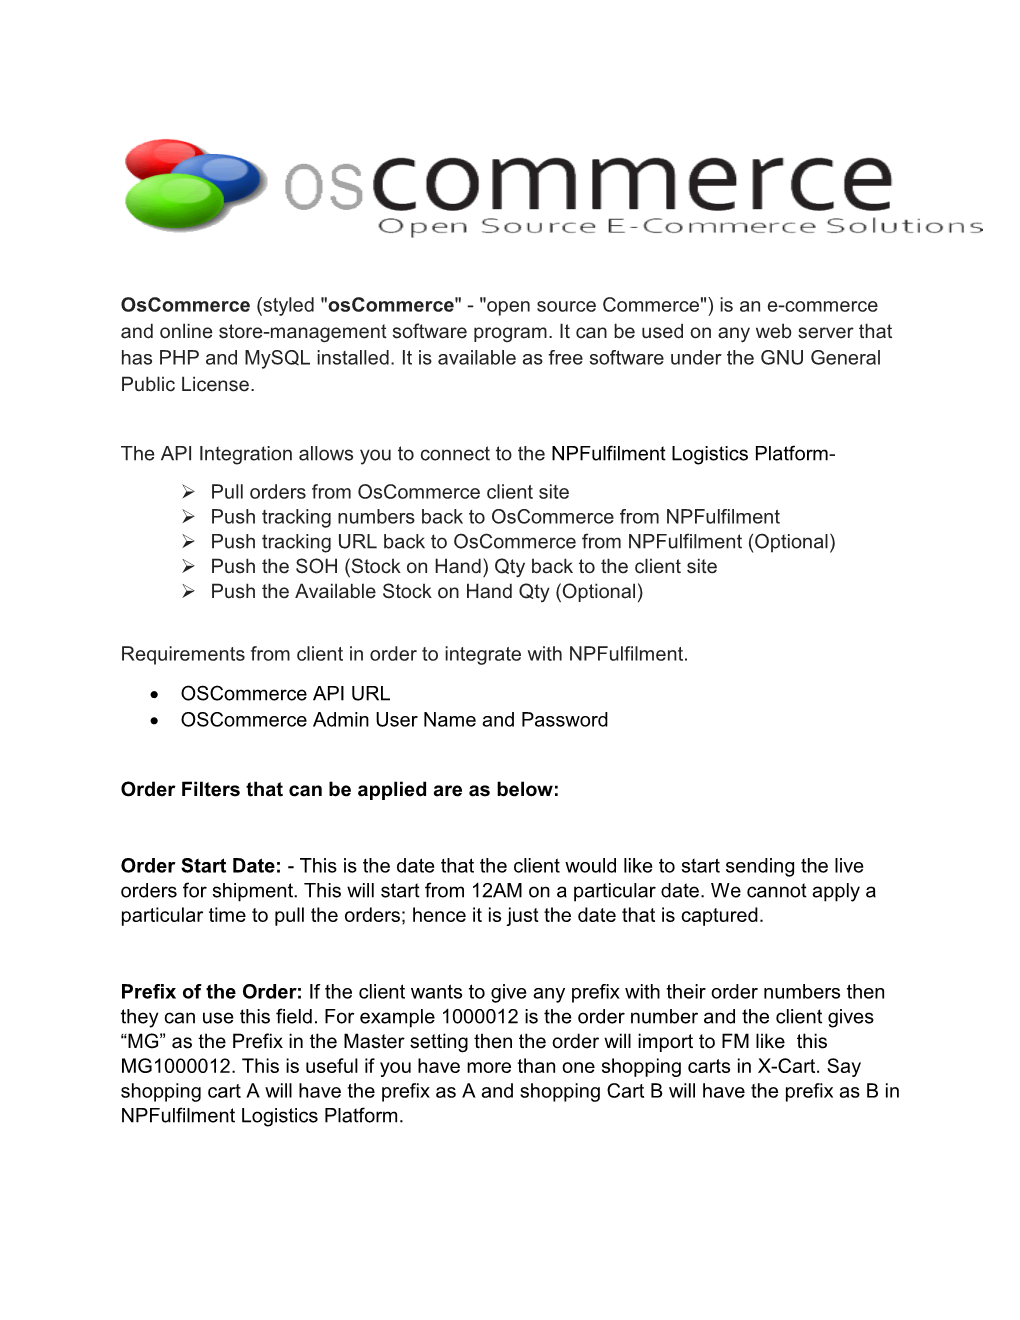 Oscommerce (Styled "Oscommerce" - "Open Source Commerce") Is an E-Commerce and Online Store-Management Software Program